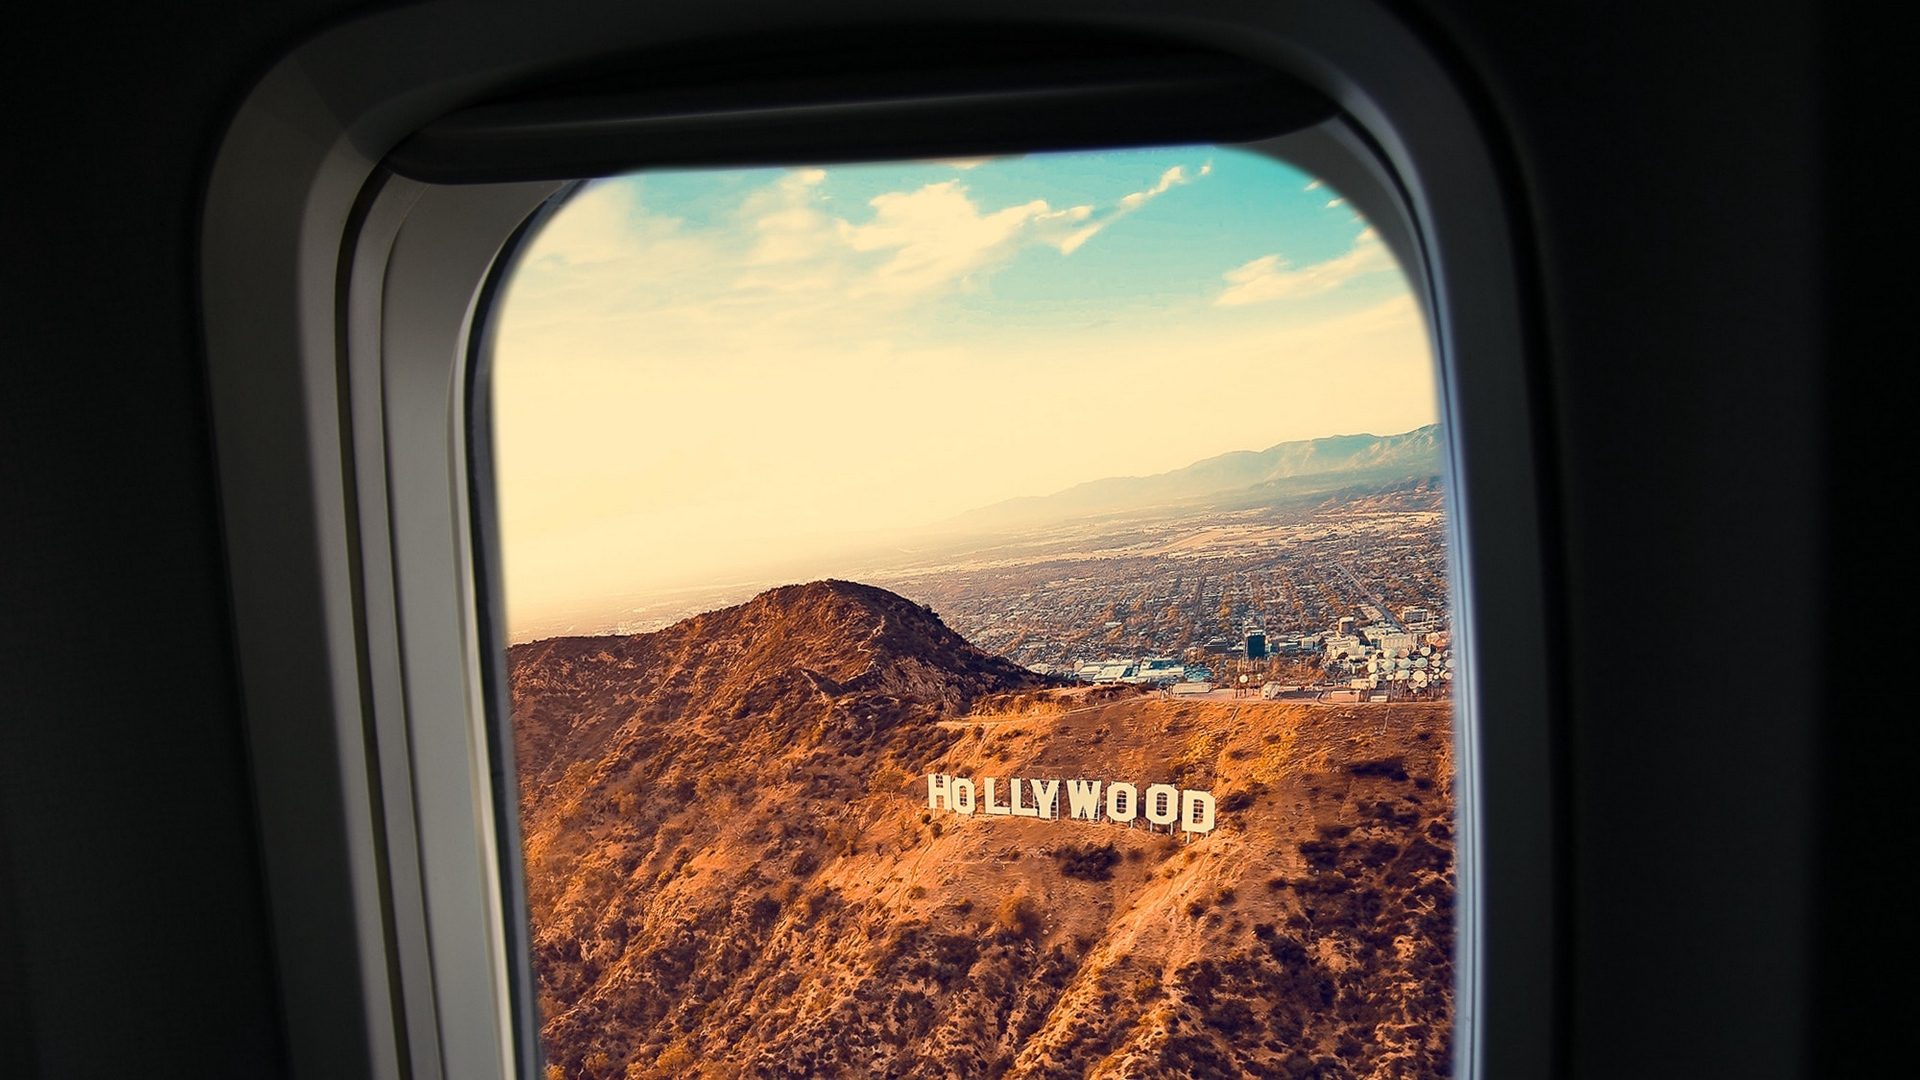 Wallpaper Of The Hollywood Sign Ed From An Airplane Window